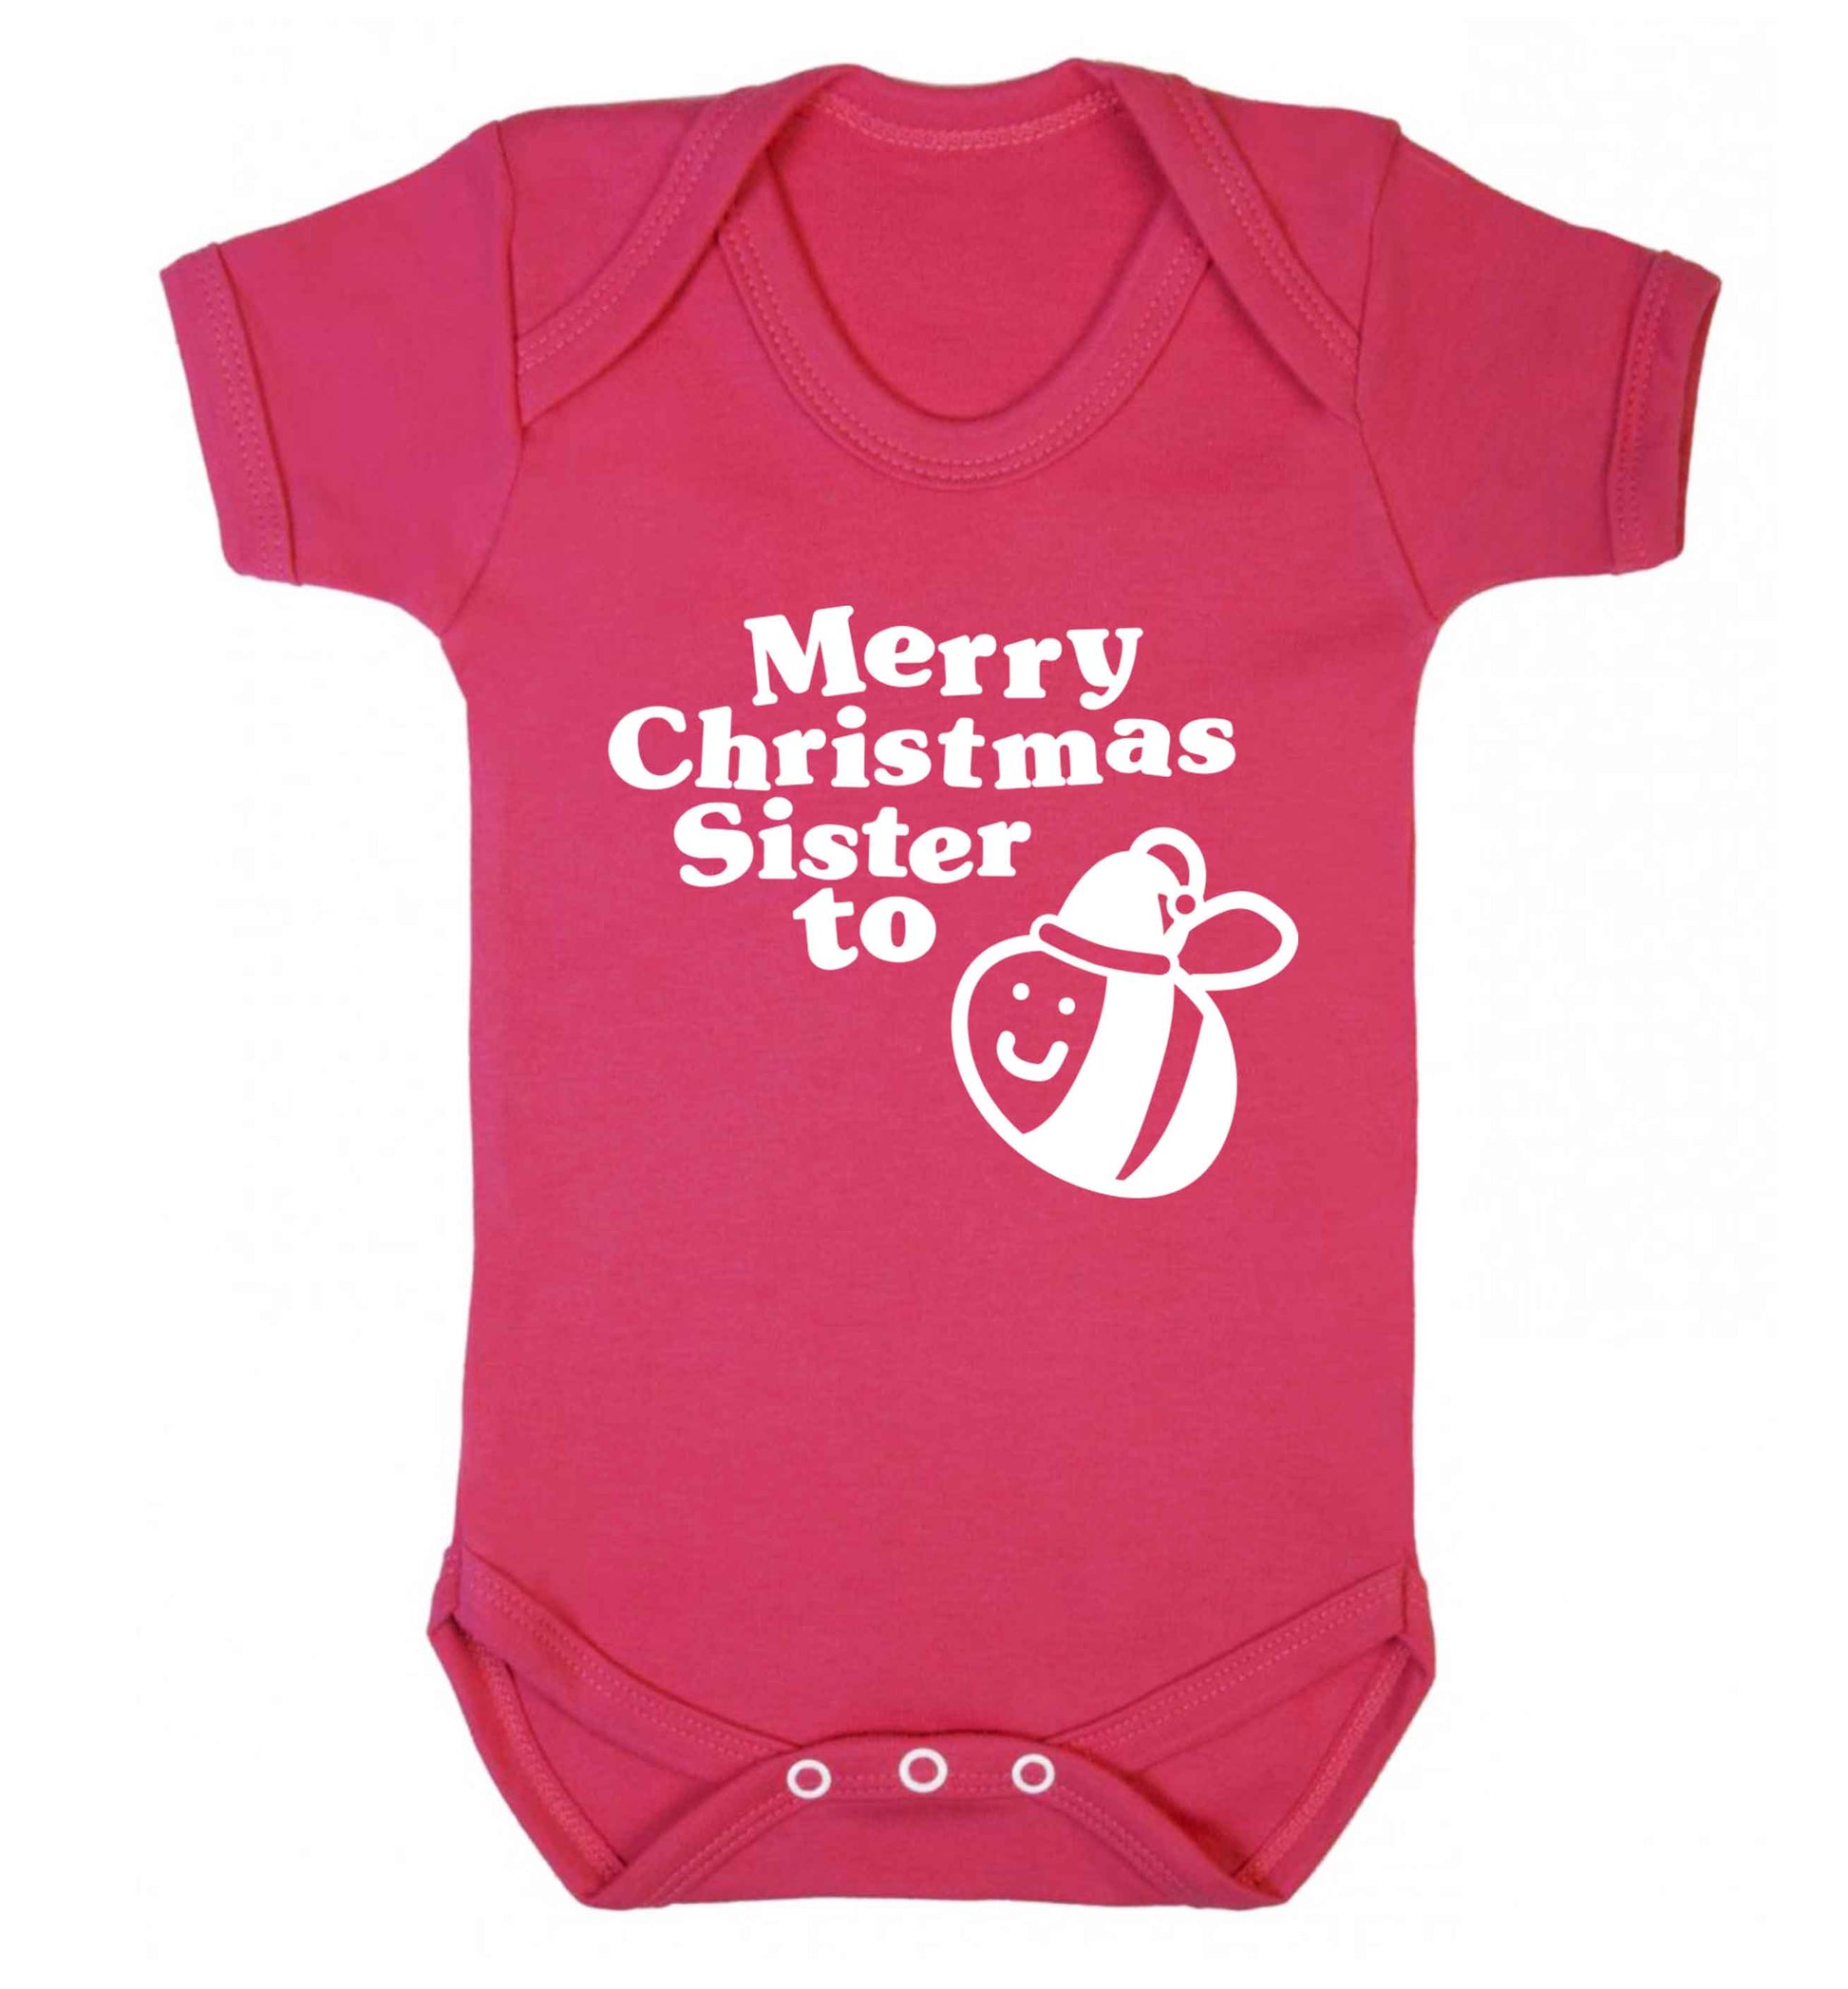 Merry Christmas sister to be Baby Vest dark pink 18-24 months